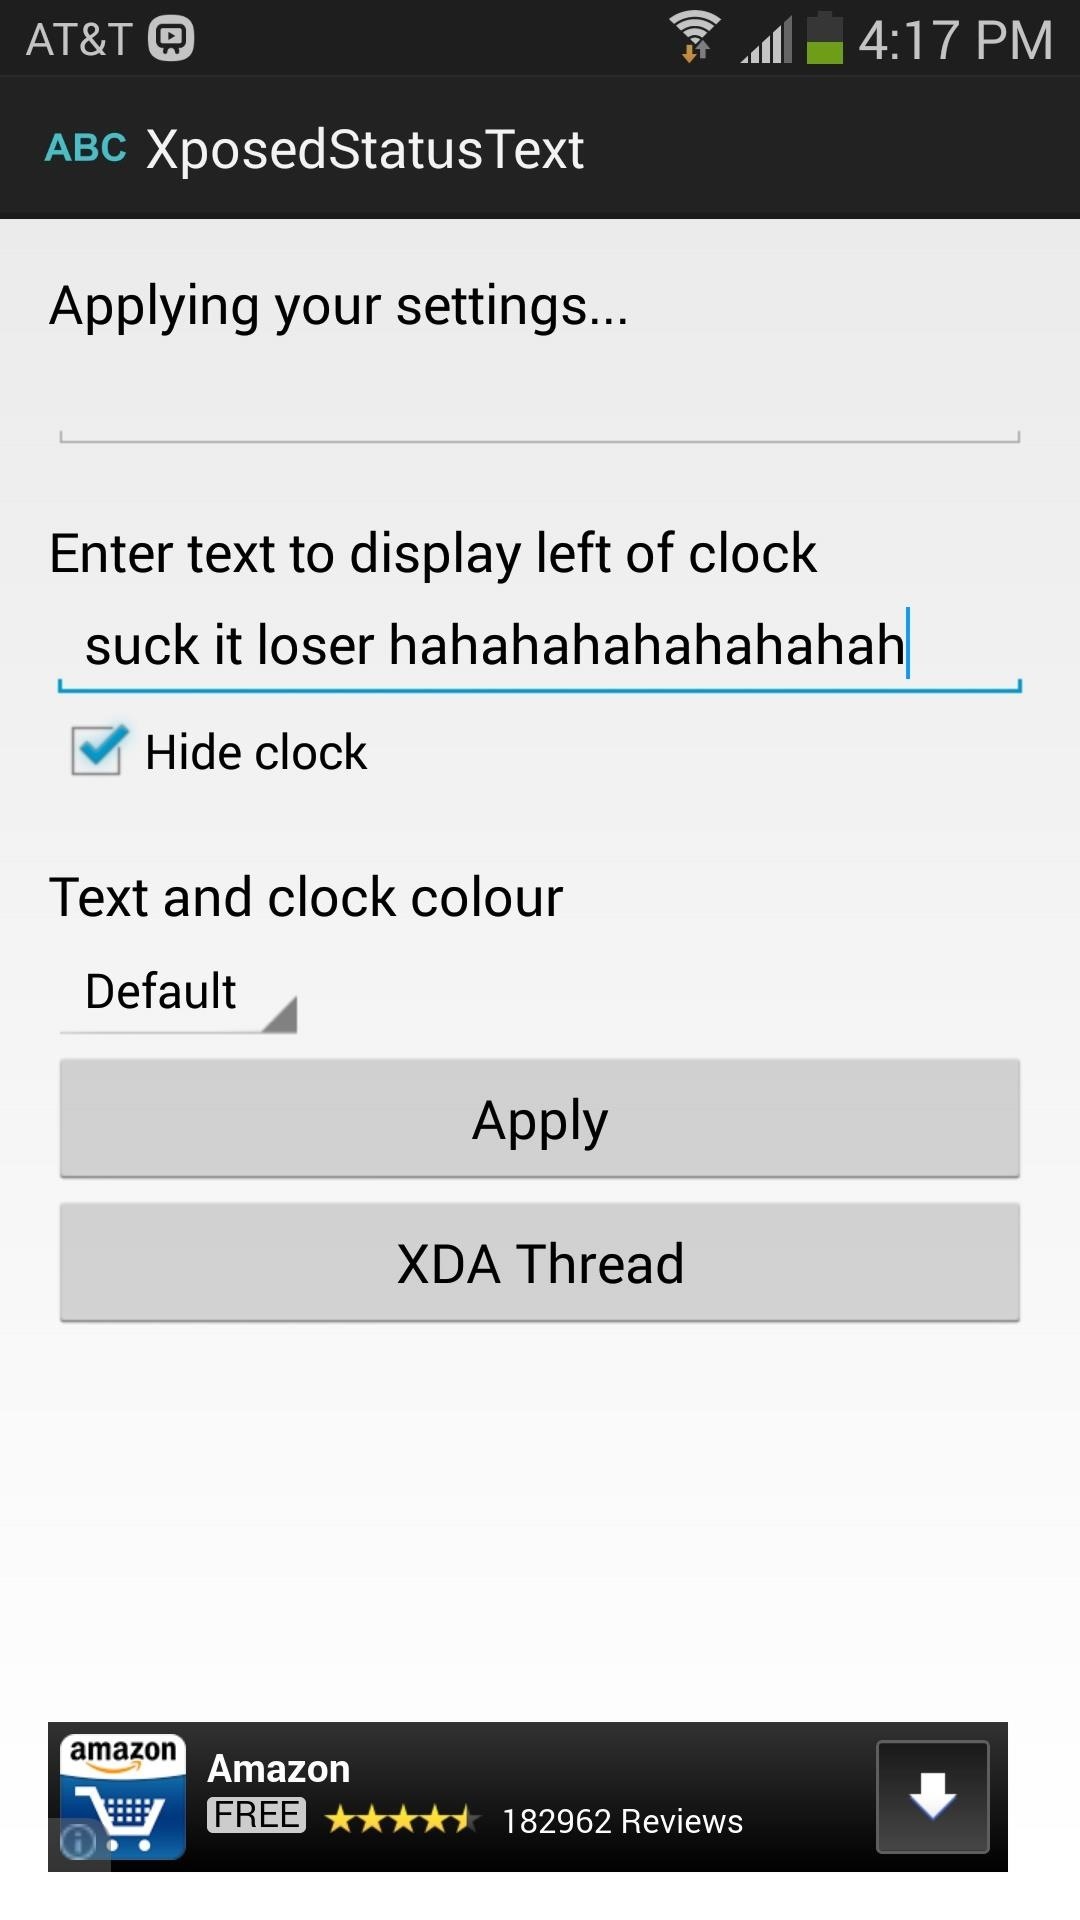 How to Add Custom Words & Phrases to Your Status Bar on the Samsung Galaxy Note 3